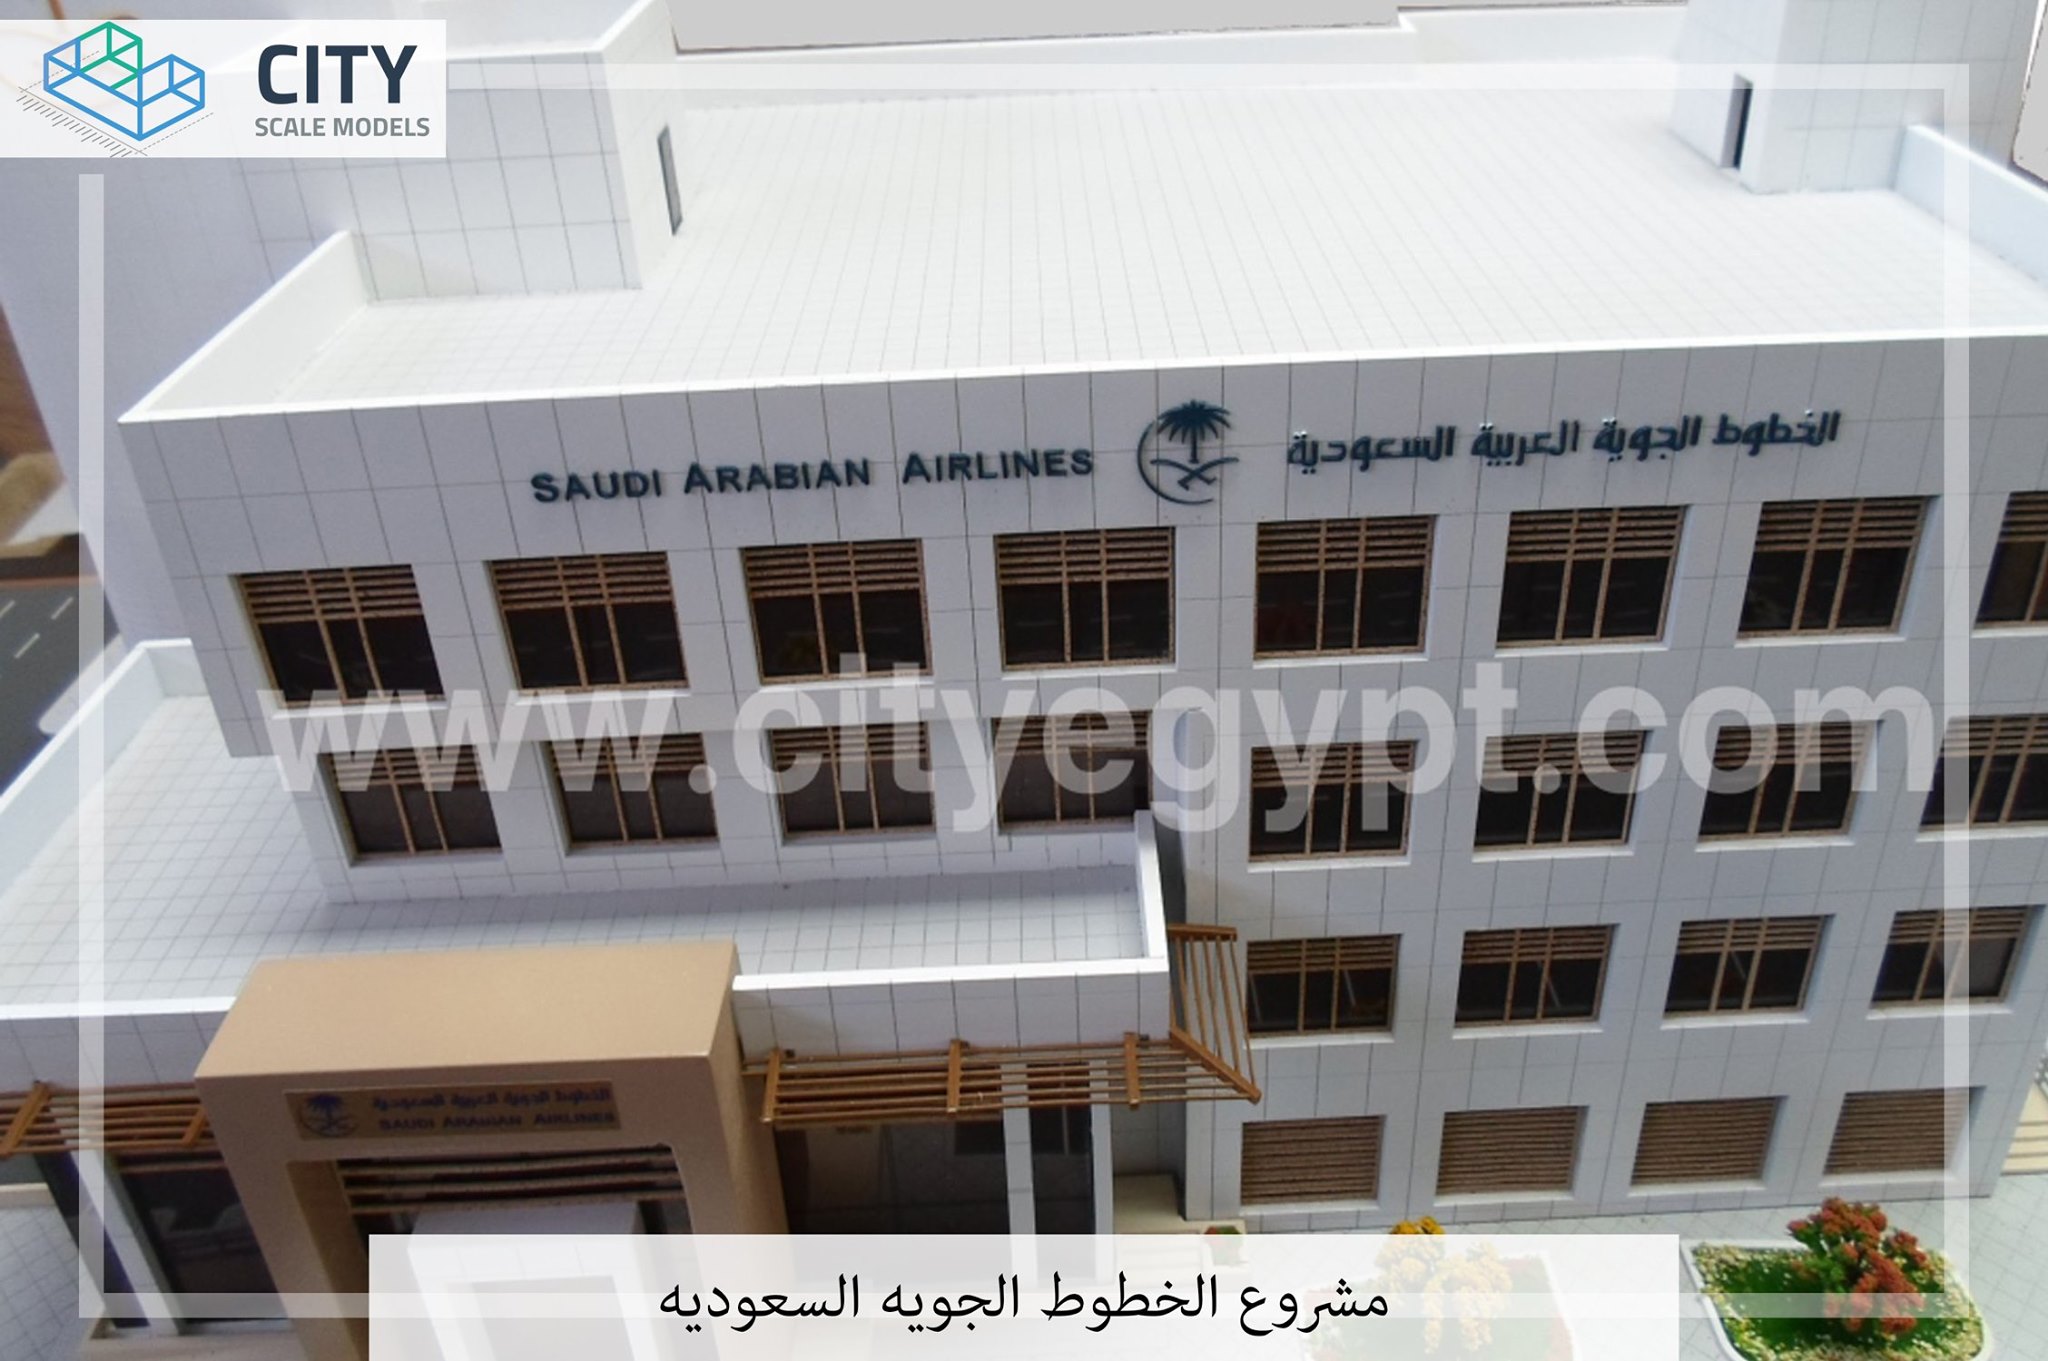 A model of the Saudi Airlines building4